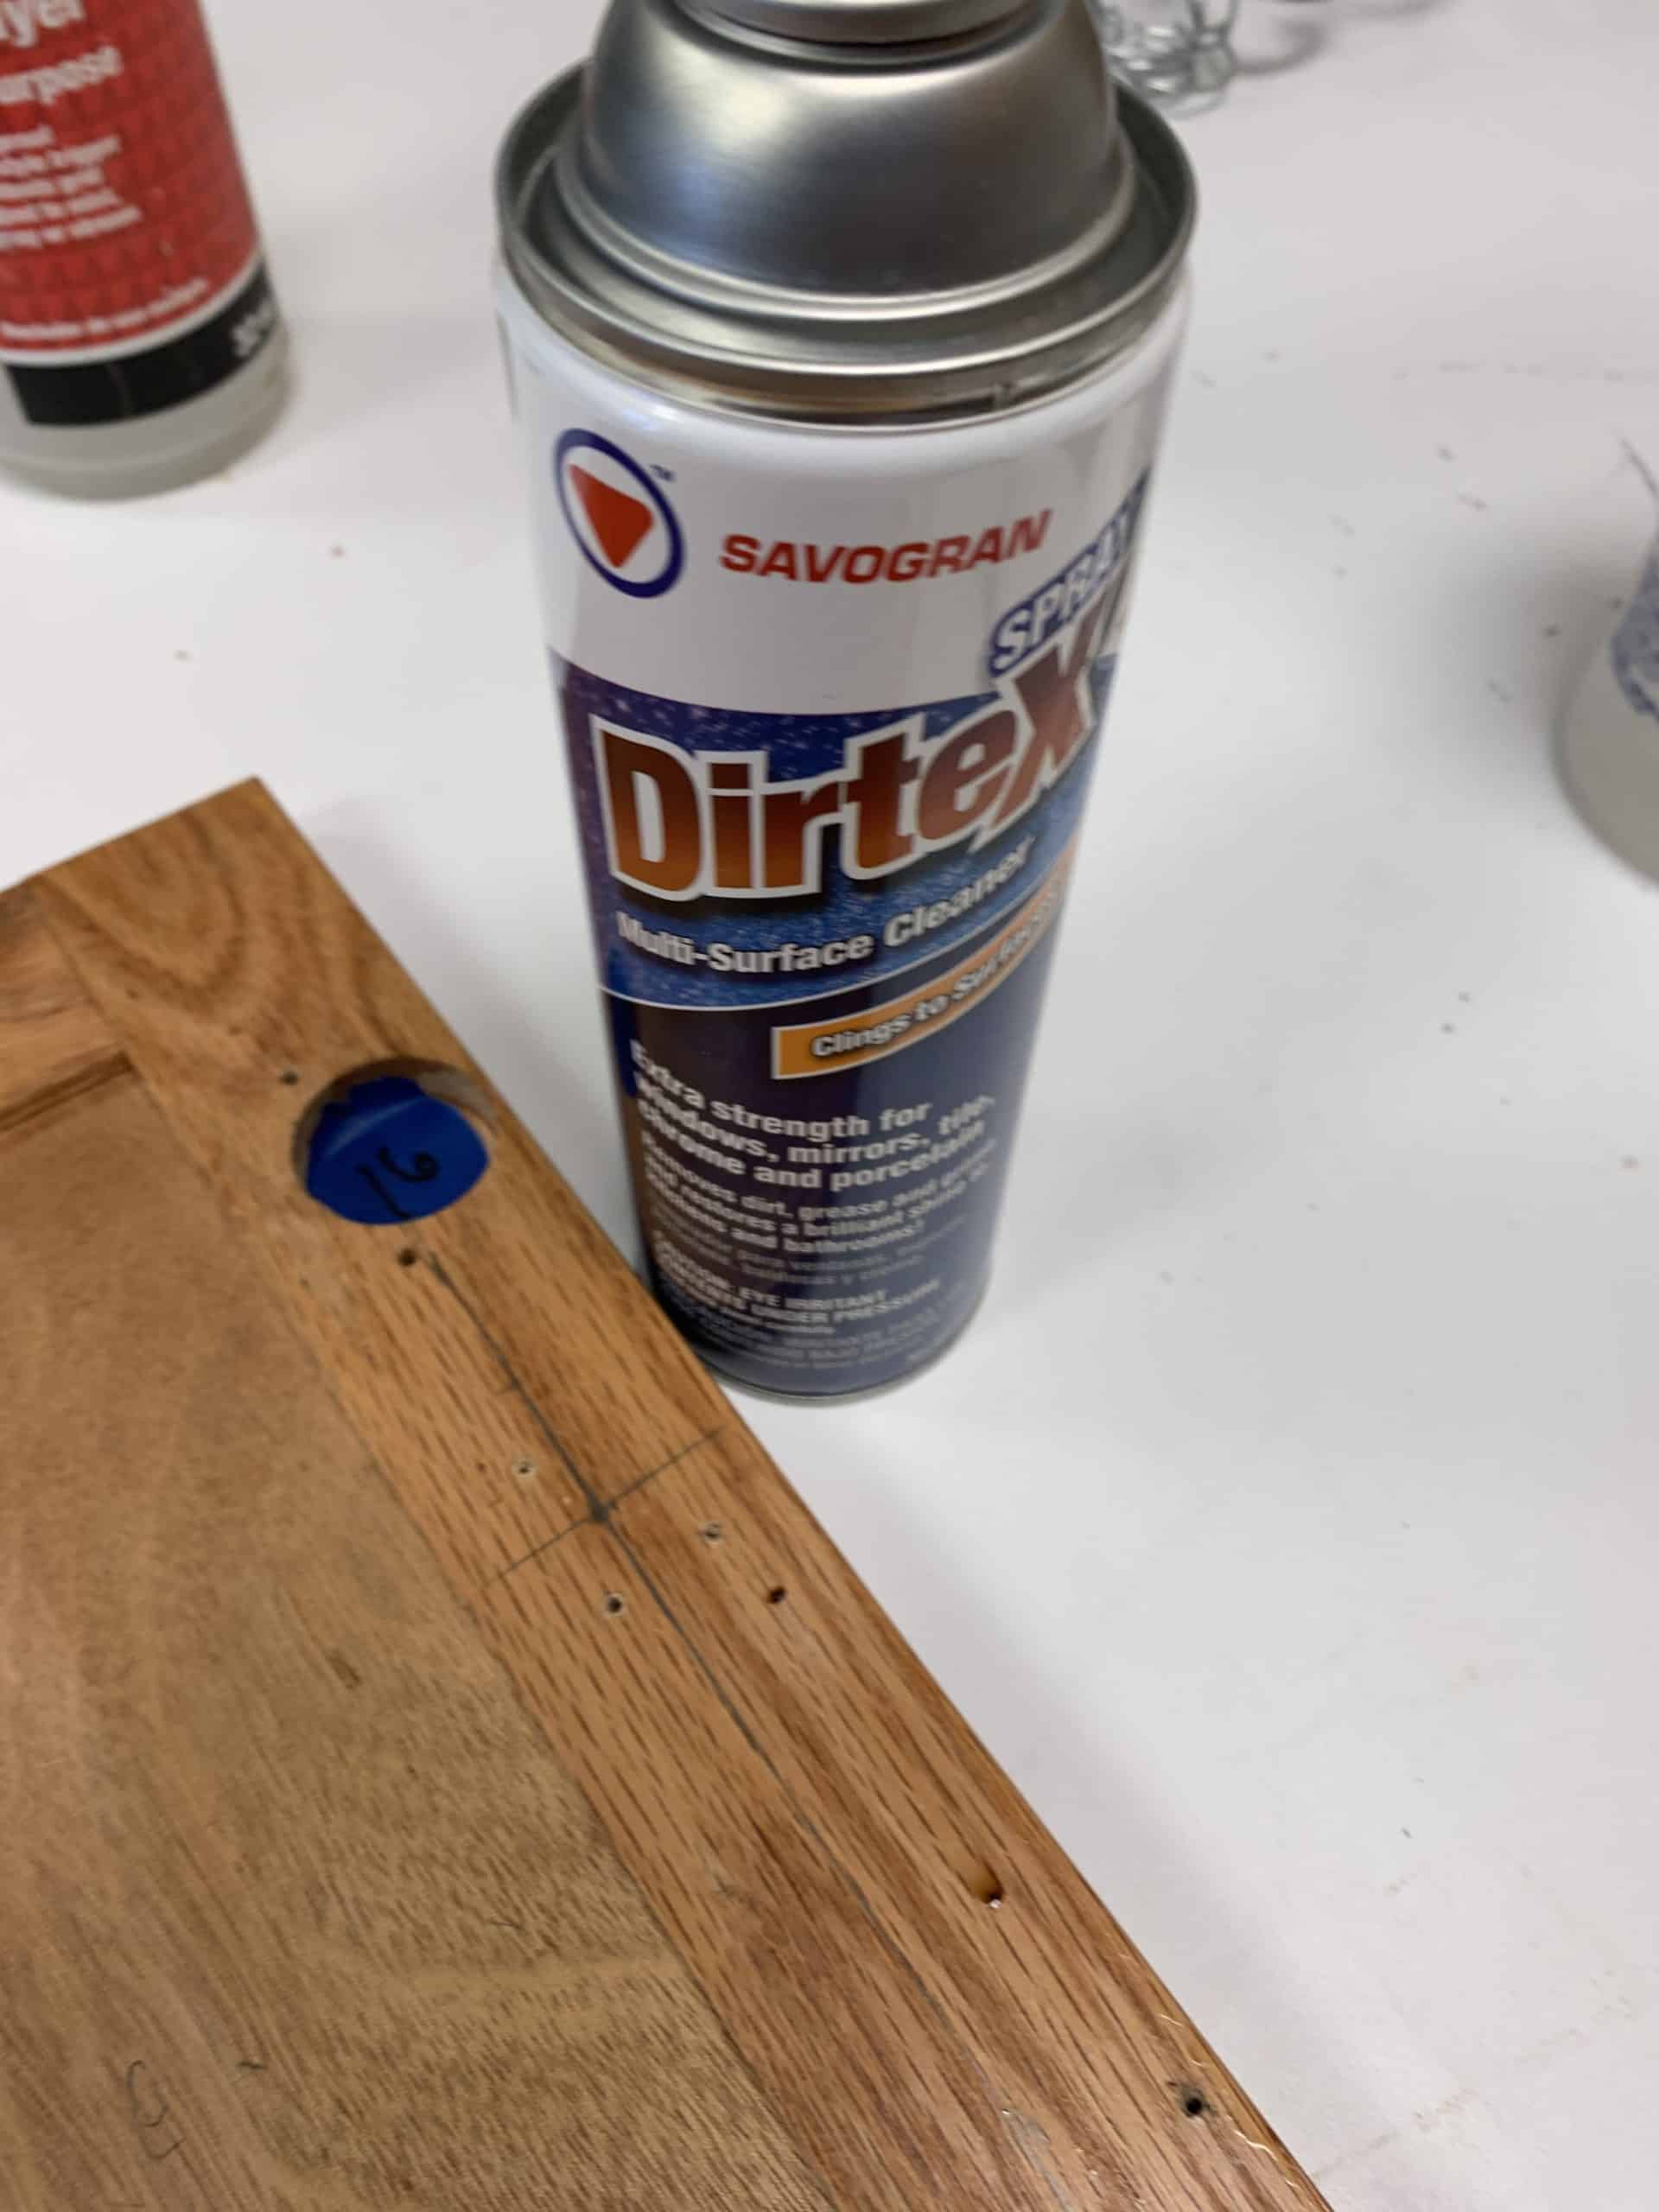 Dirtex cleaner - kitchen cabinet cleaning